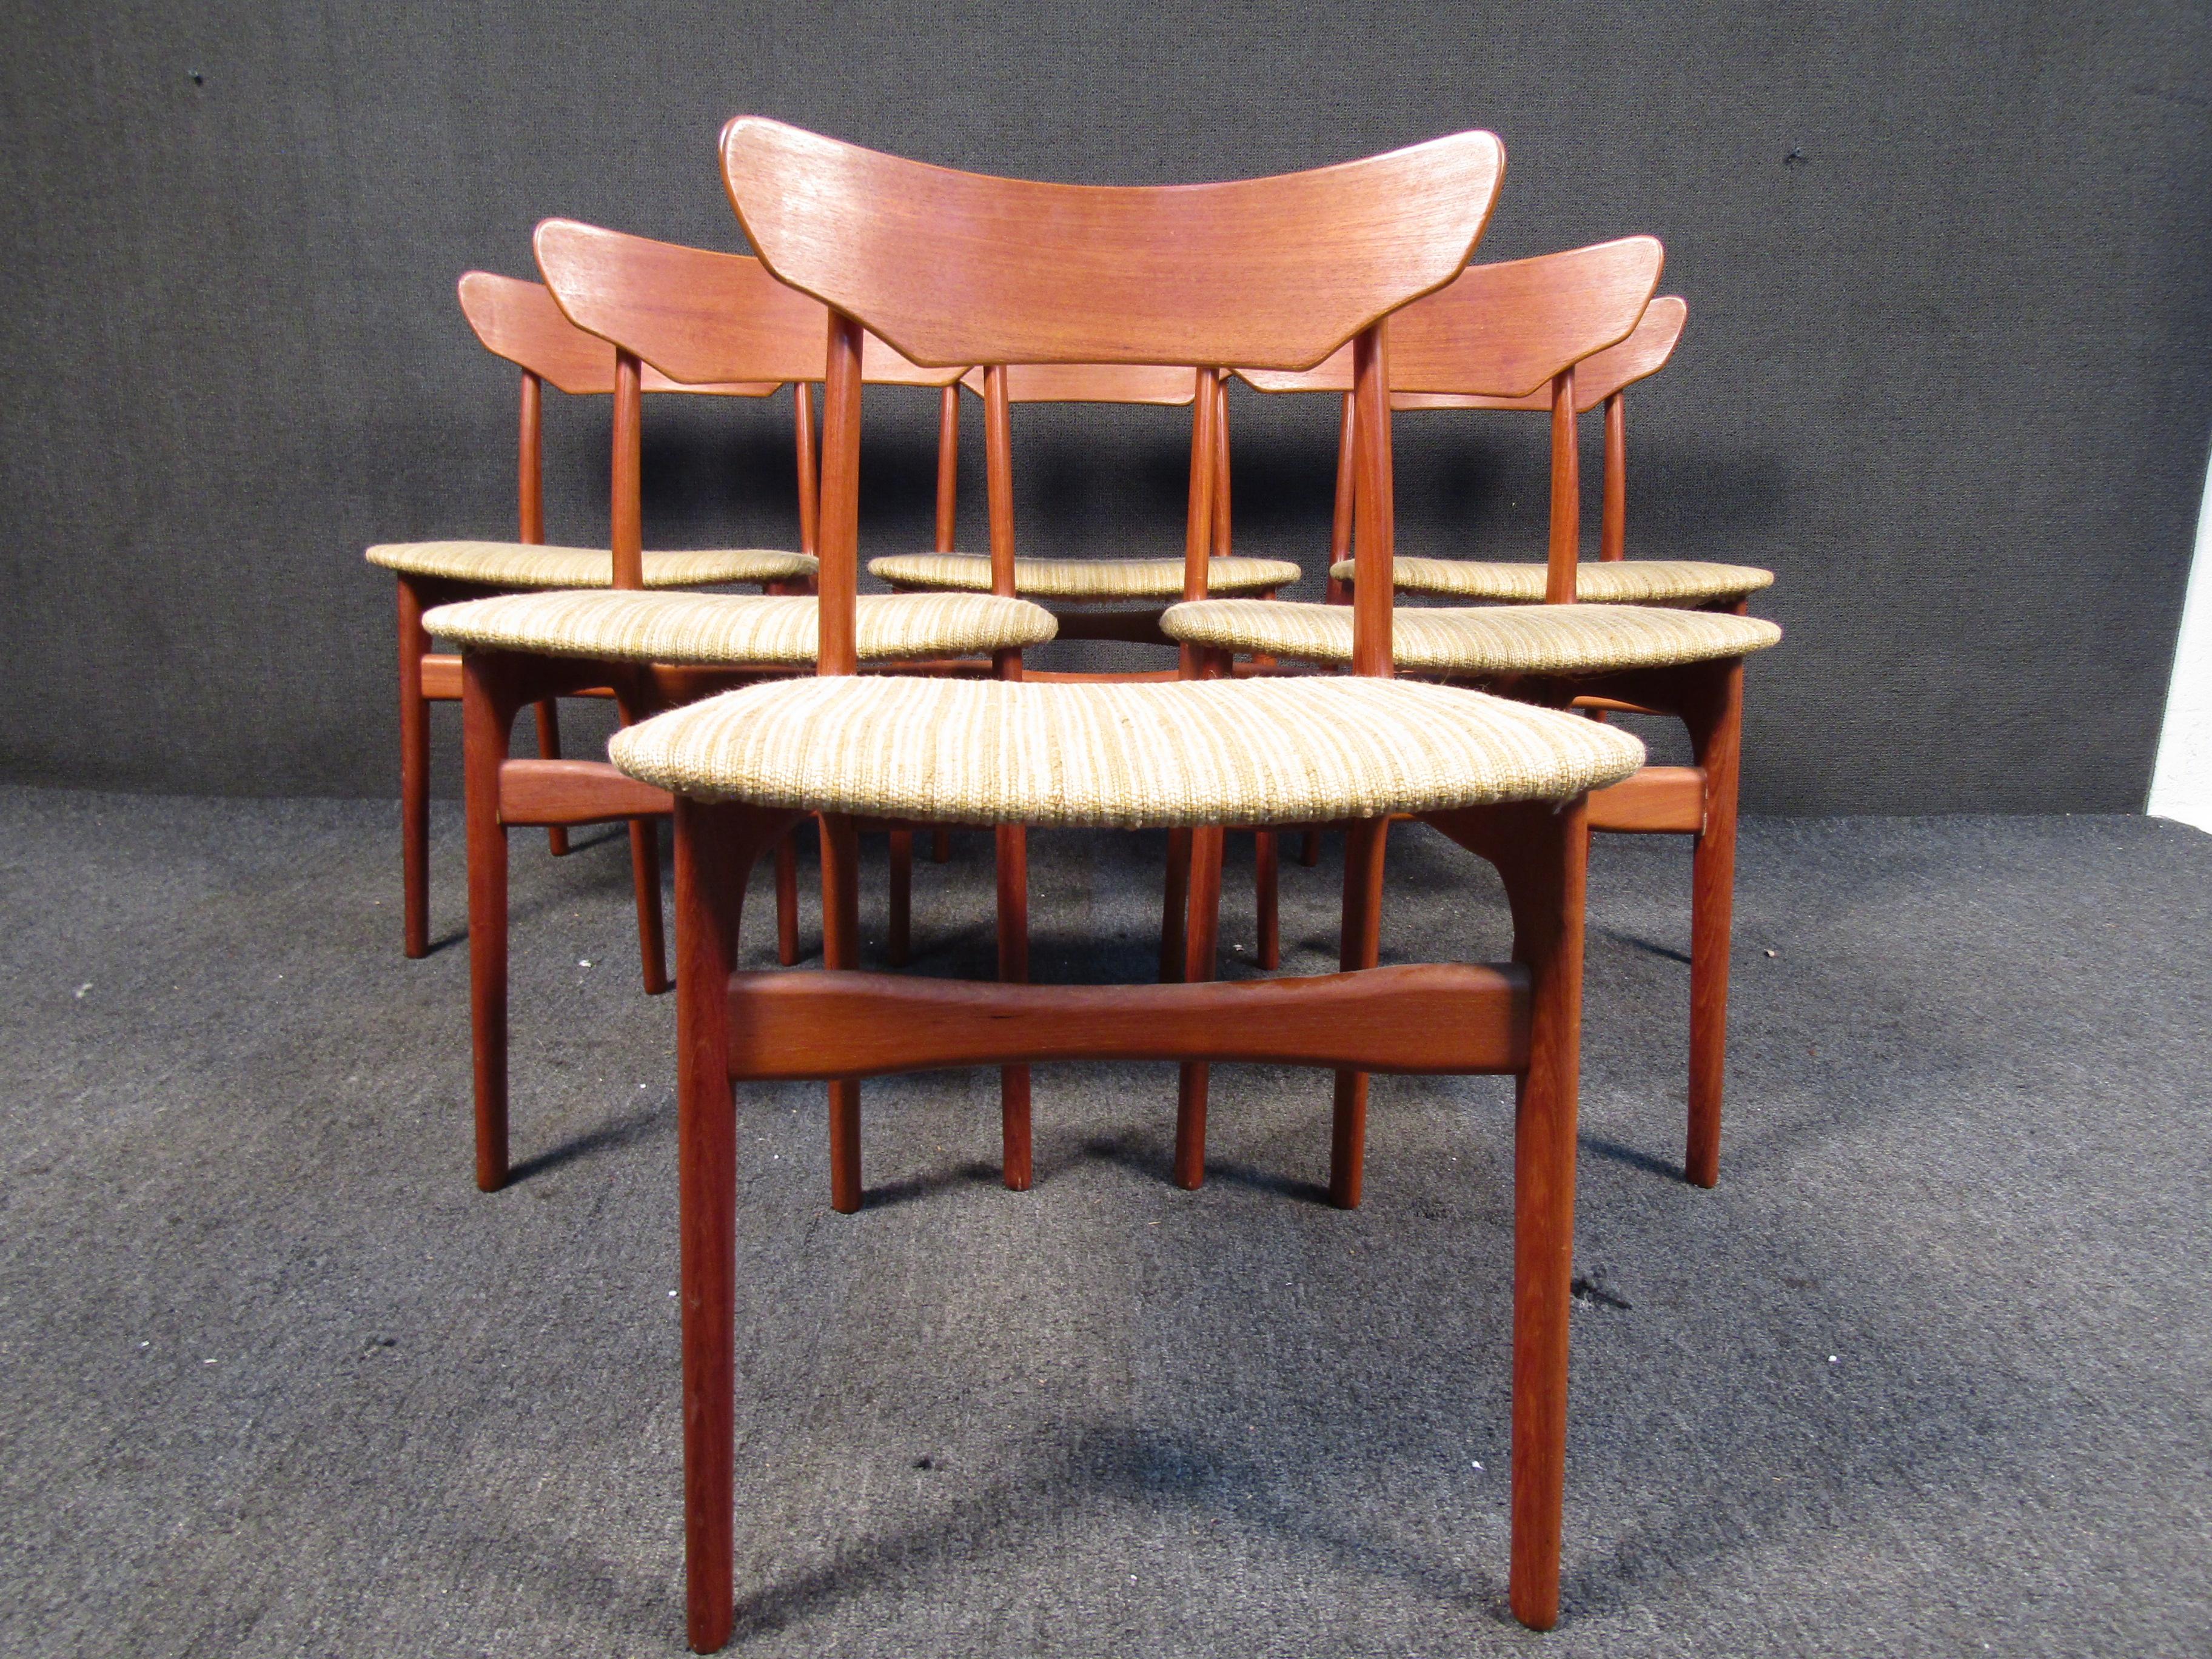 With sleek sculpted teak frames and upholstered seats and backs, this set of Mid-Century Danish dining chairs are a stylish addition to any dining room. Please confirm item location with seller (NY/NJ).